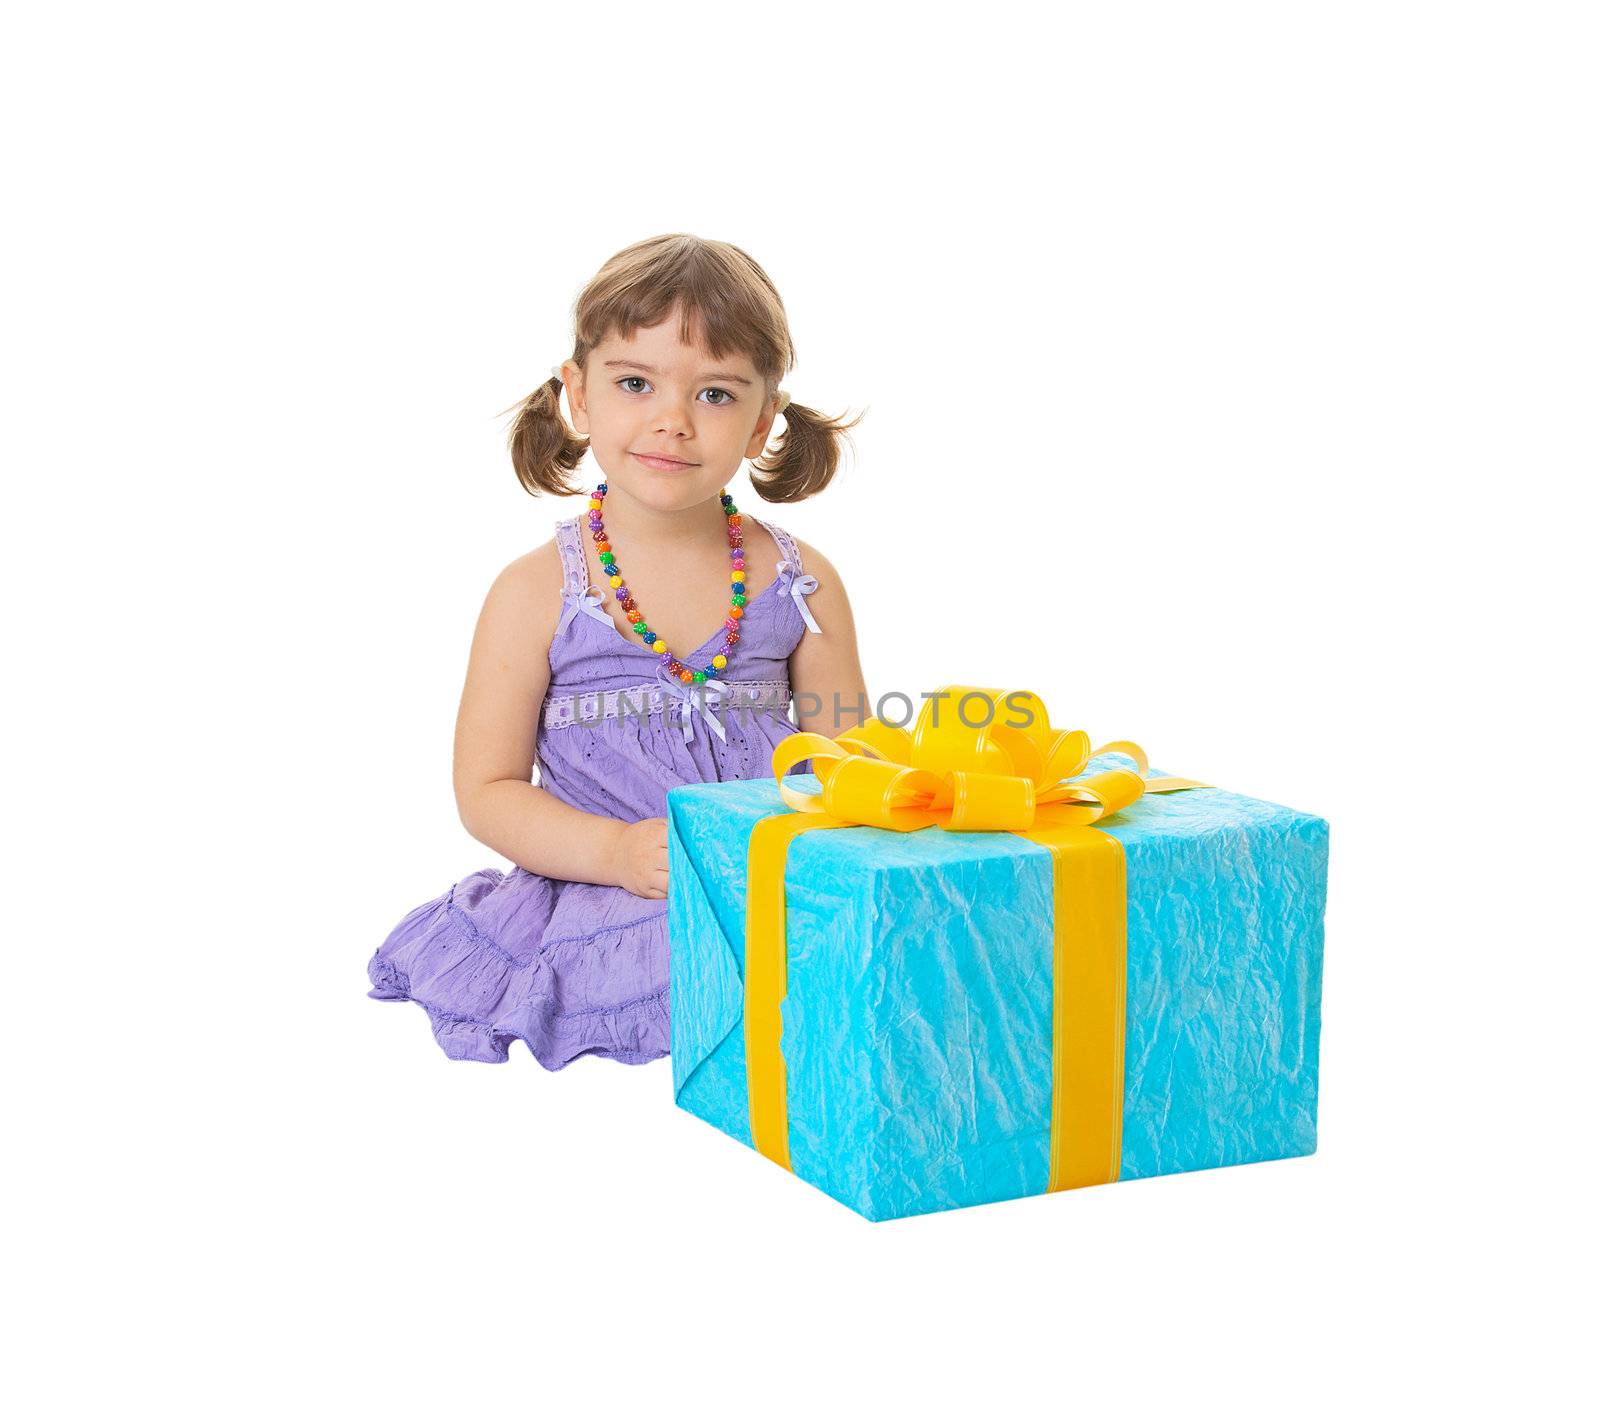 The child has received a big birthday gift isolated on white background